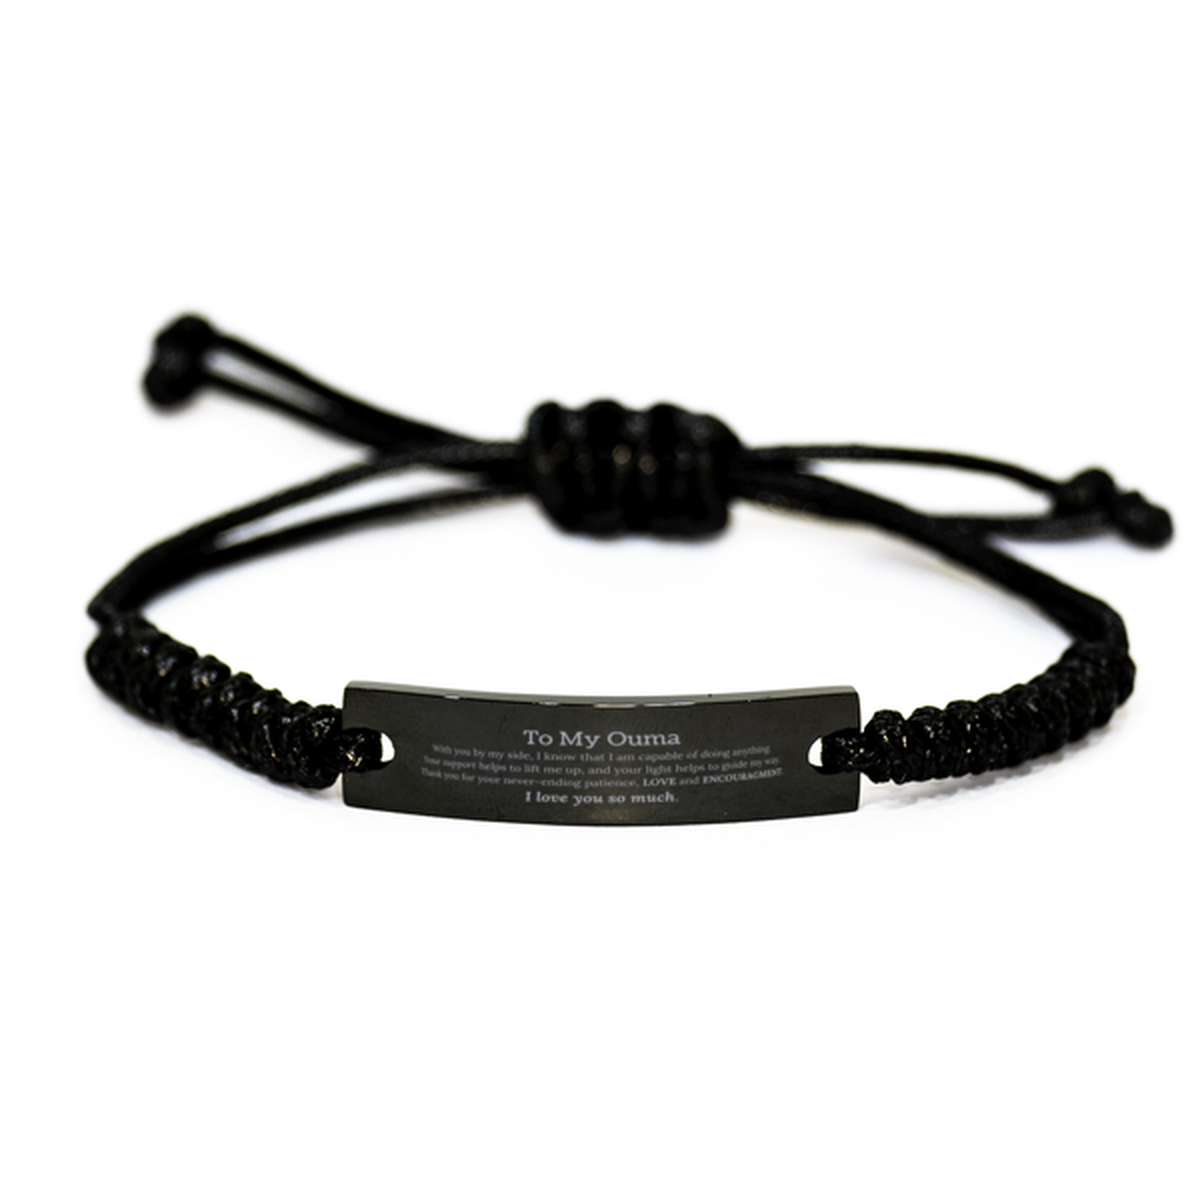 Appreciation Ouma Black Rope Bracelet Gifts, To My Ouma Birthday Christmas Wedding Keepsake Gifts for Ouma With you by my side, I know that I am capable of doing anything. I love you so much